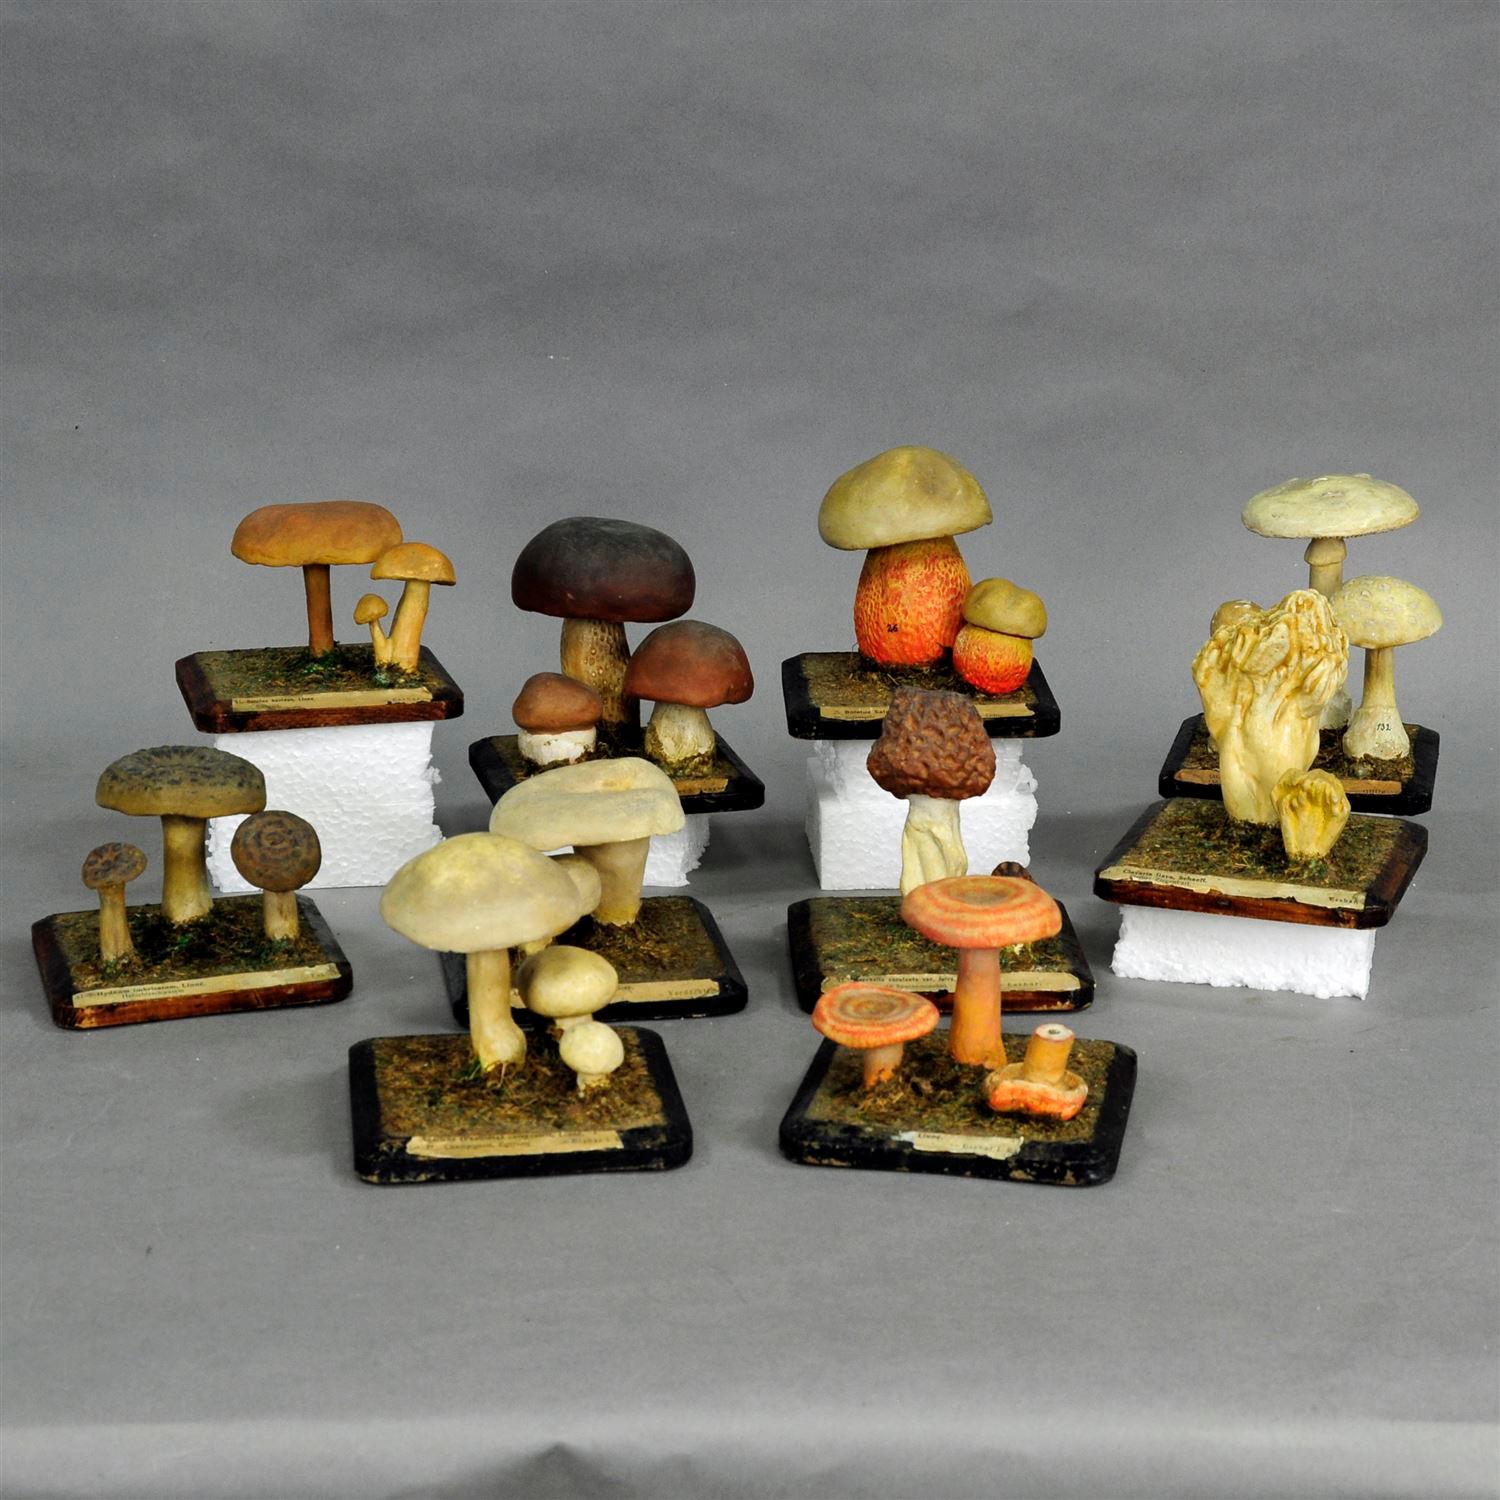 A bunch of ten mushroom vintage school models made of wood and paper mâché (some labels in German and Latin language). A label inscription of each part is fastened underneath. Used as teaching material in German schools, circa 1930.

Measures: